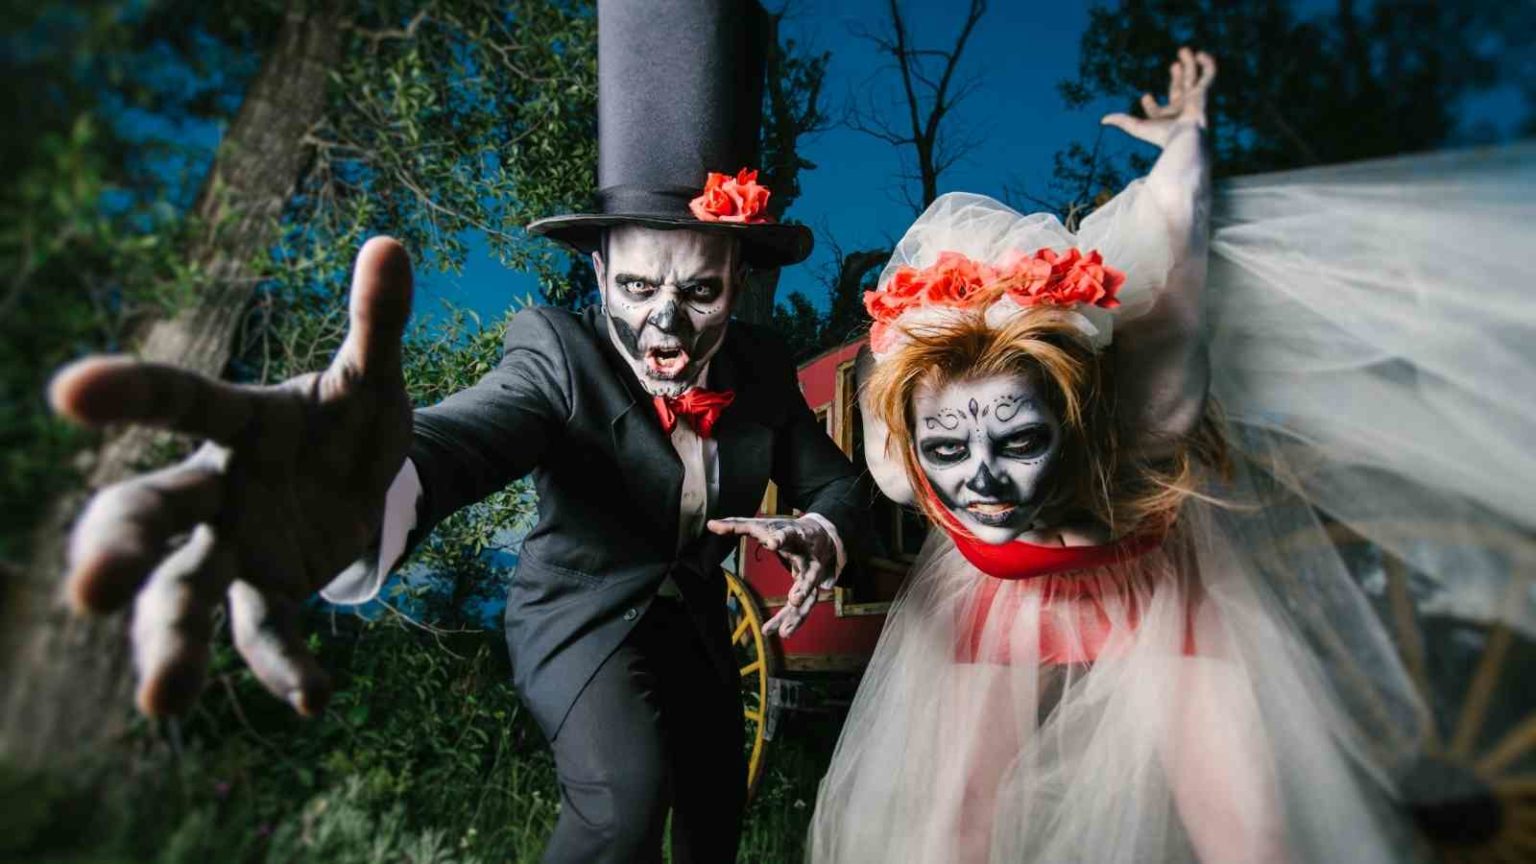 12 Unique Halloween Wedding Ideas To Make Your Day Magical